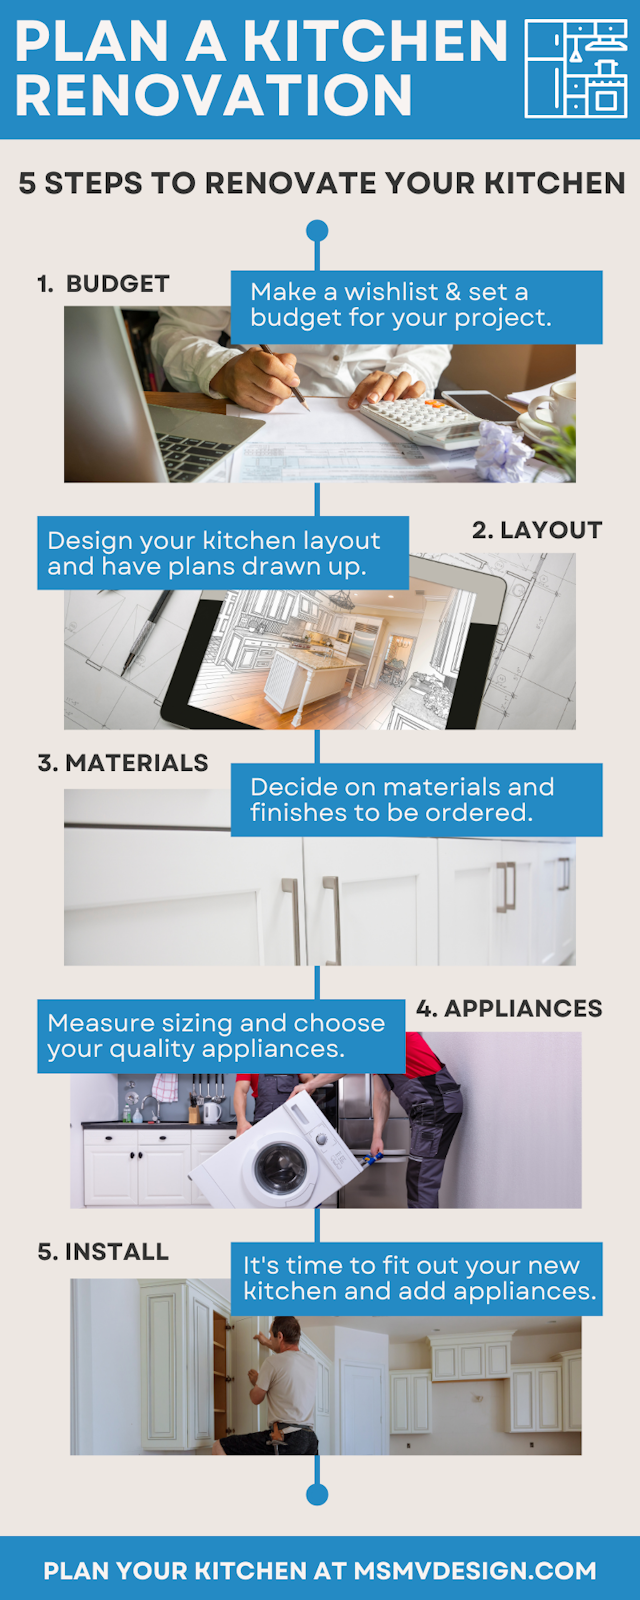 5 Steps to Plan Your Kitchen Renovation (INFOGRAPHIC)